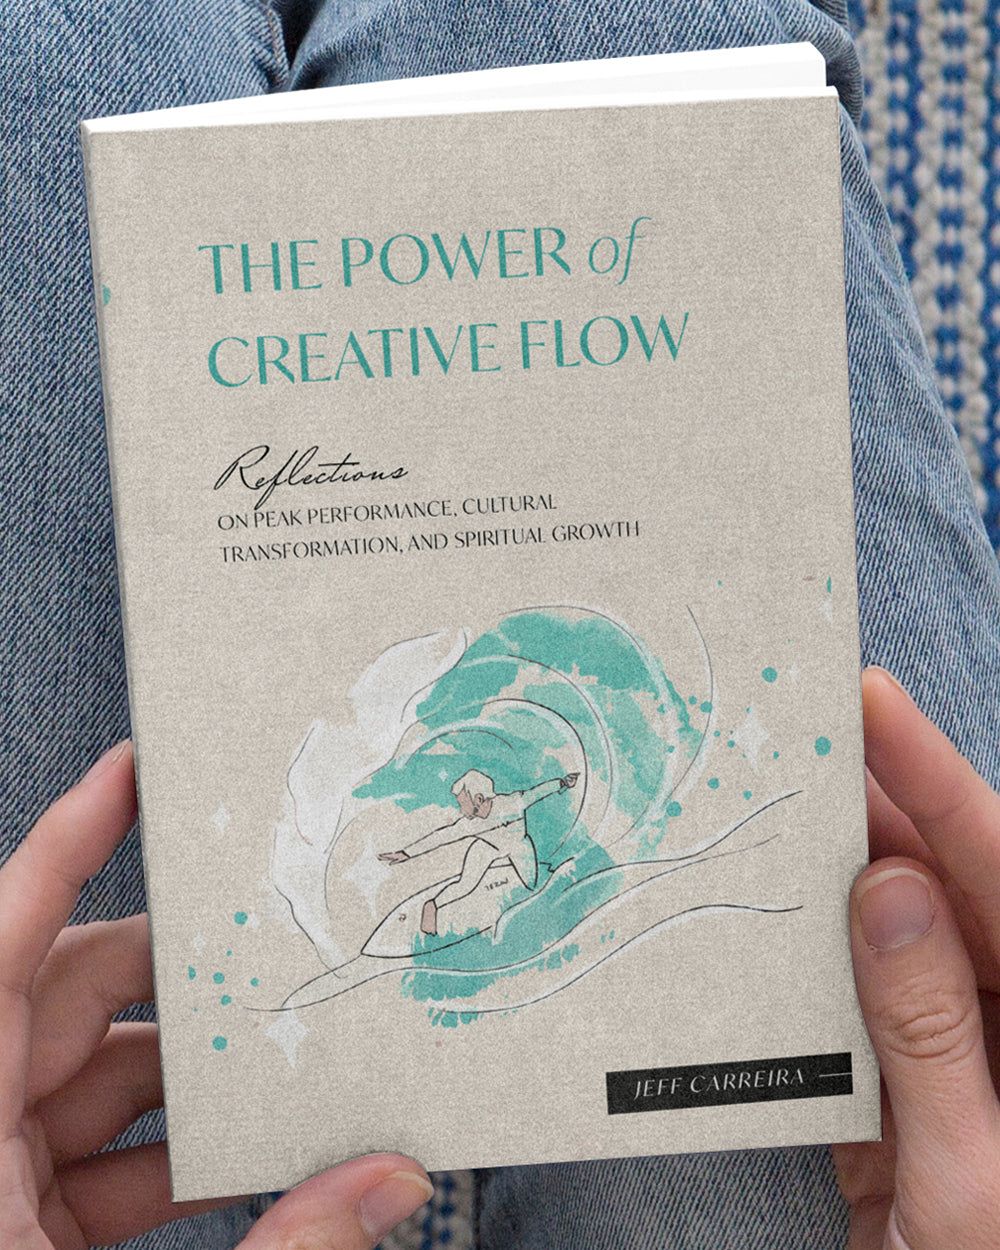 The Power of Creative Flow: Reflections on Peak Performance, Cultural Transformation, and Spiritual Growth